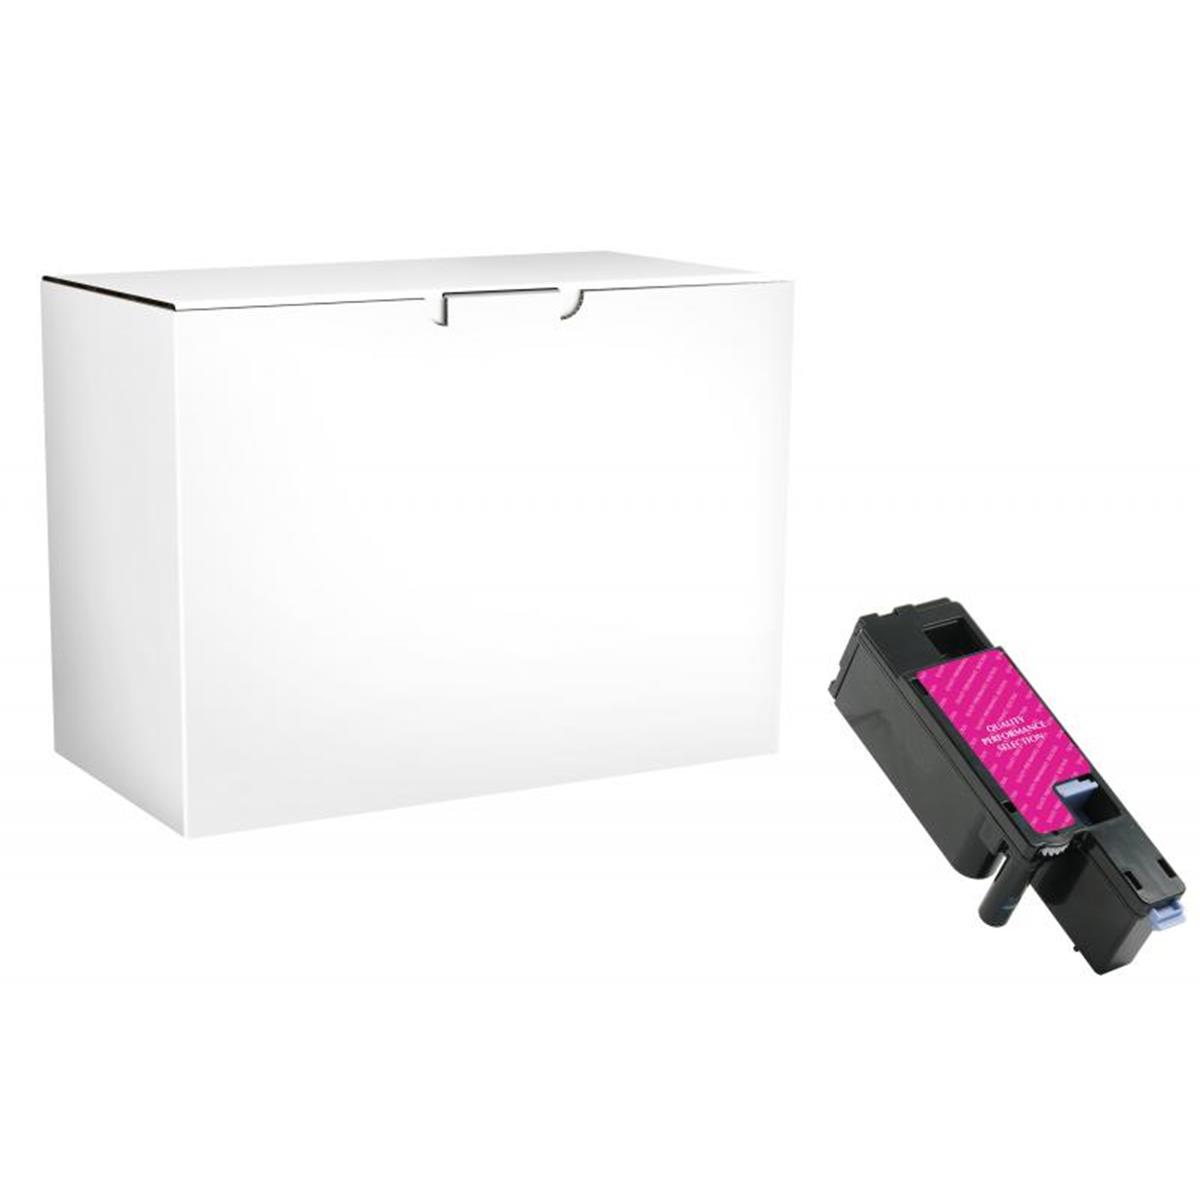 Picture of Dell 200750 Magenta Toner Cartridge for Dell C1660